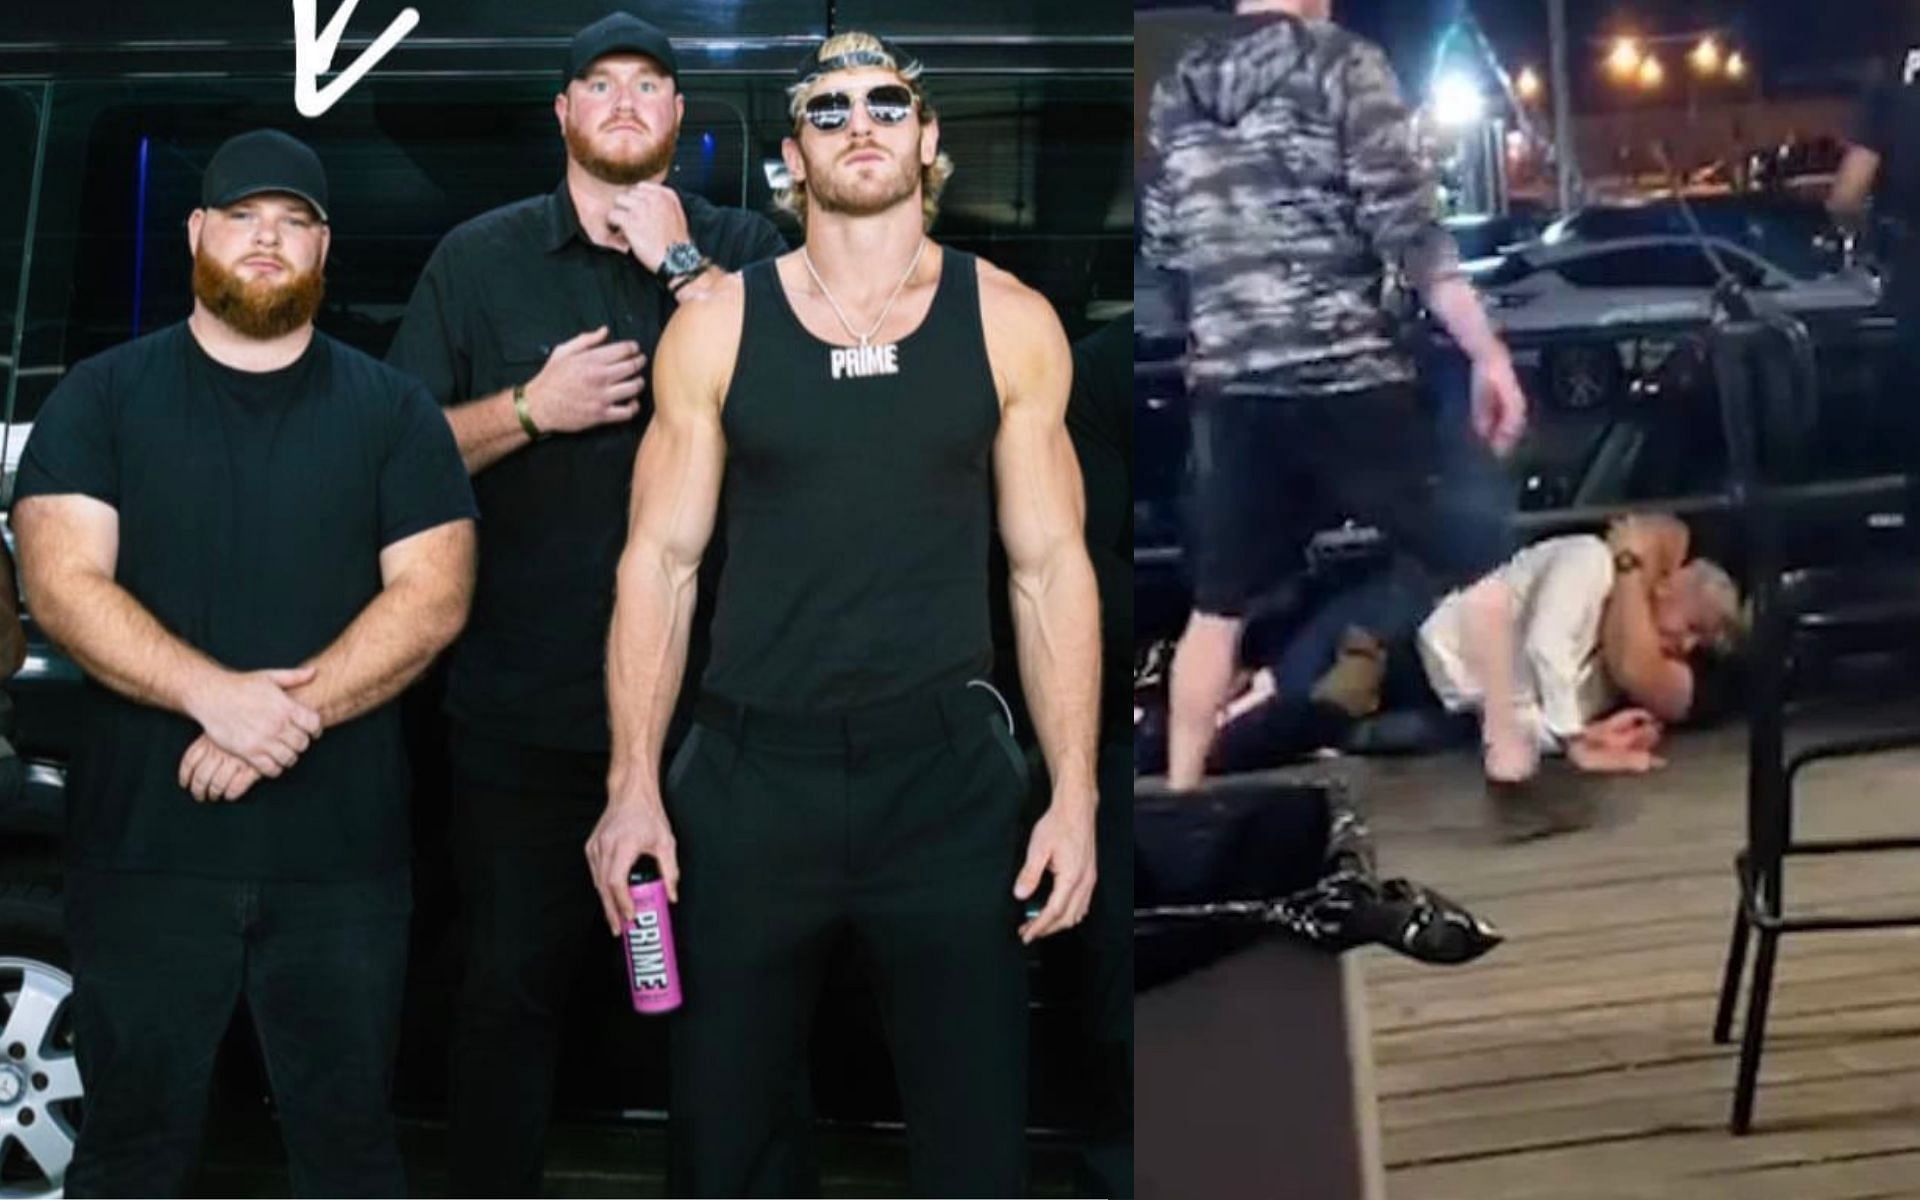 Logan Paul and the bouncer (left) and the bouncer choking Dillon Danis (right). [via Twitter @HappyPunch]